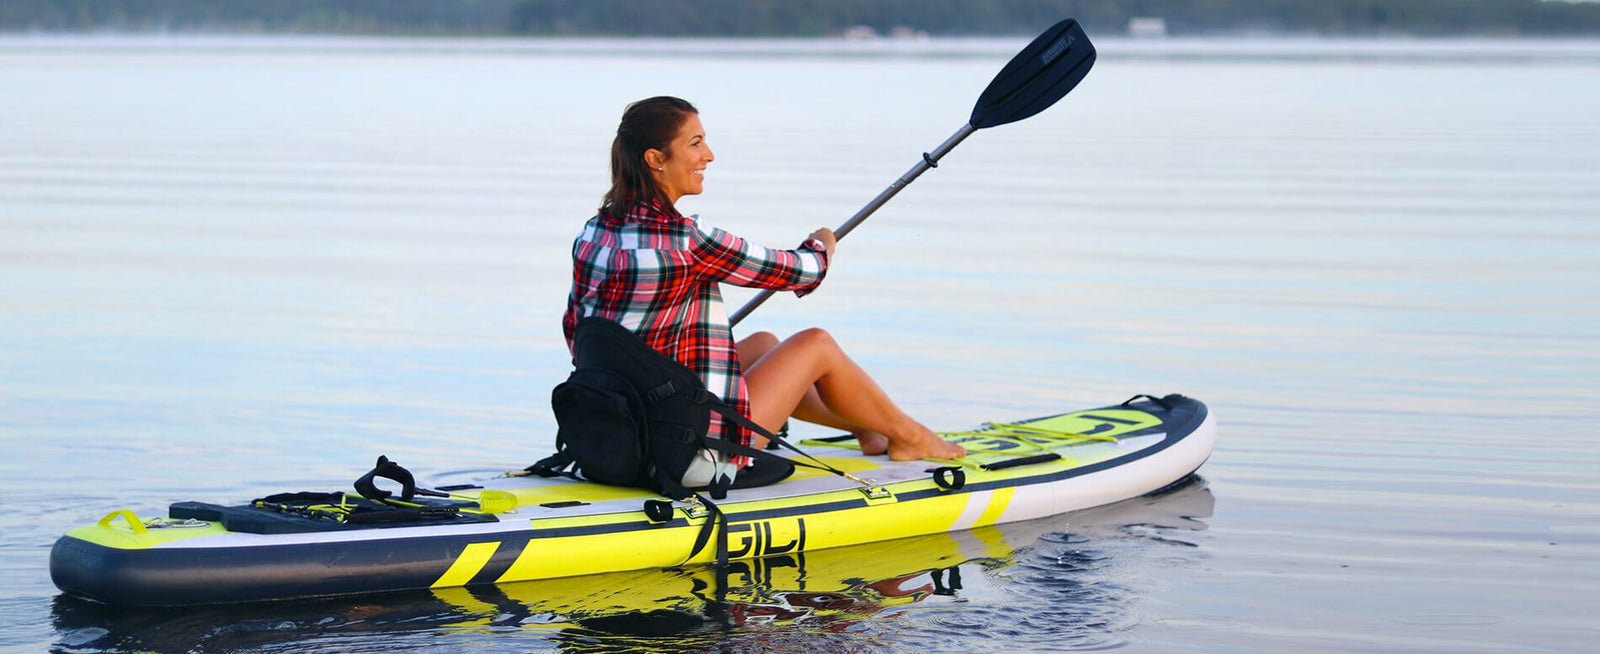 How to Turn Your iSUP Into a Kayak